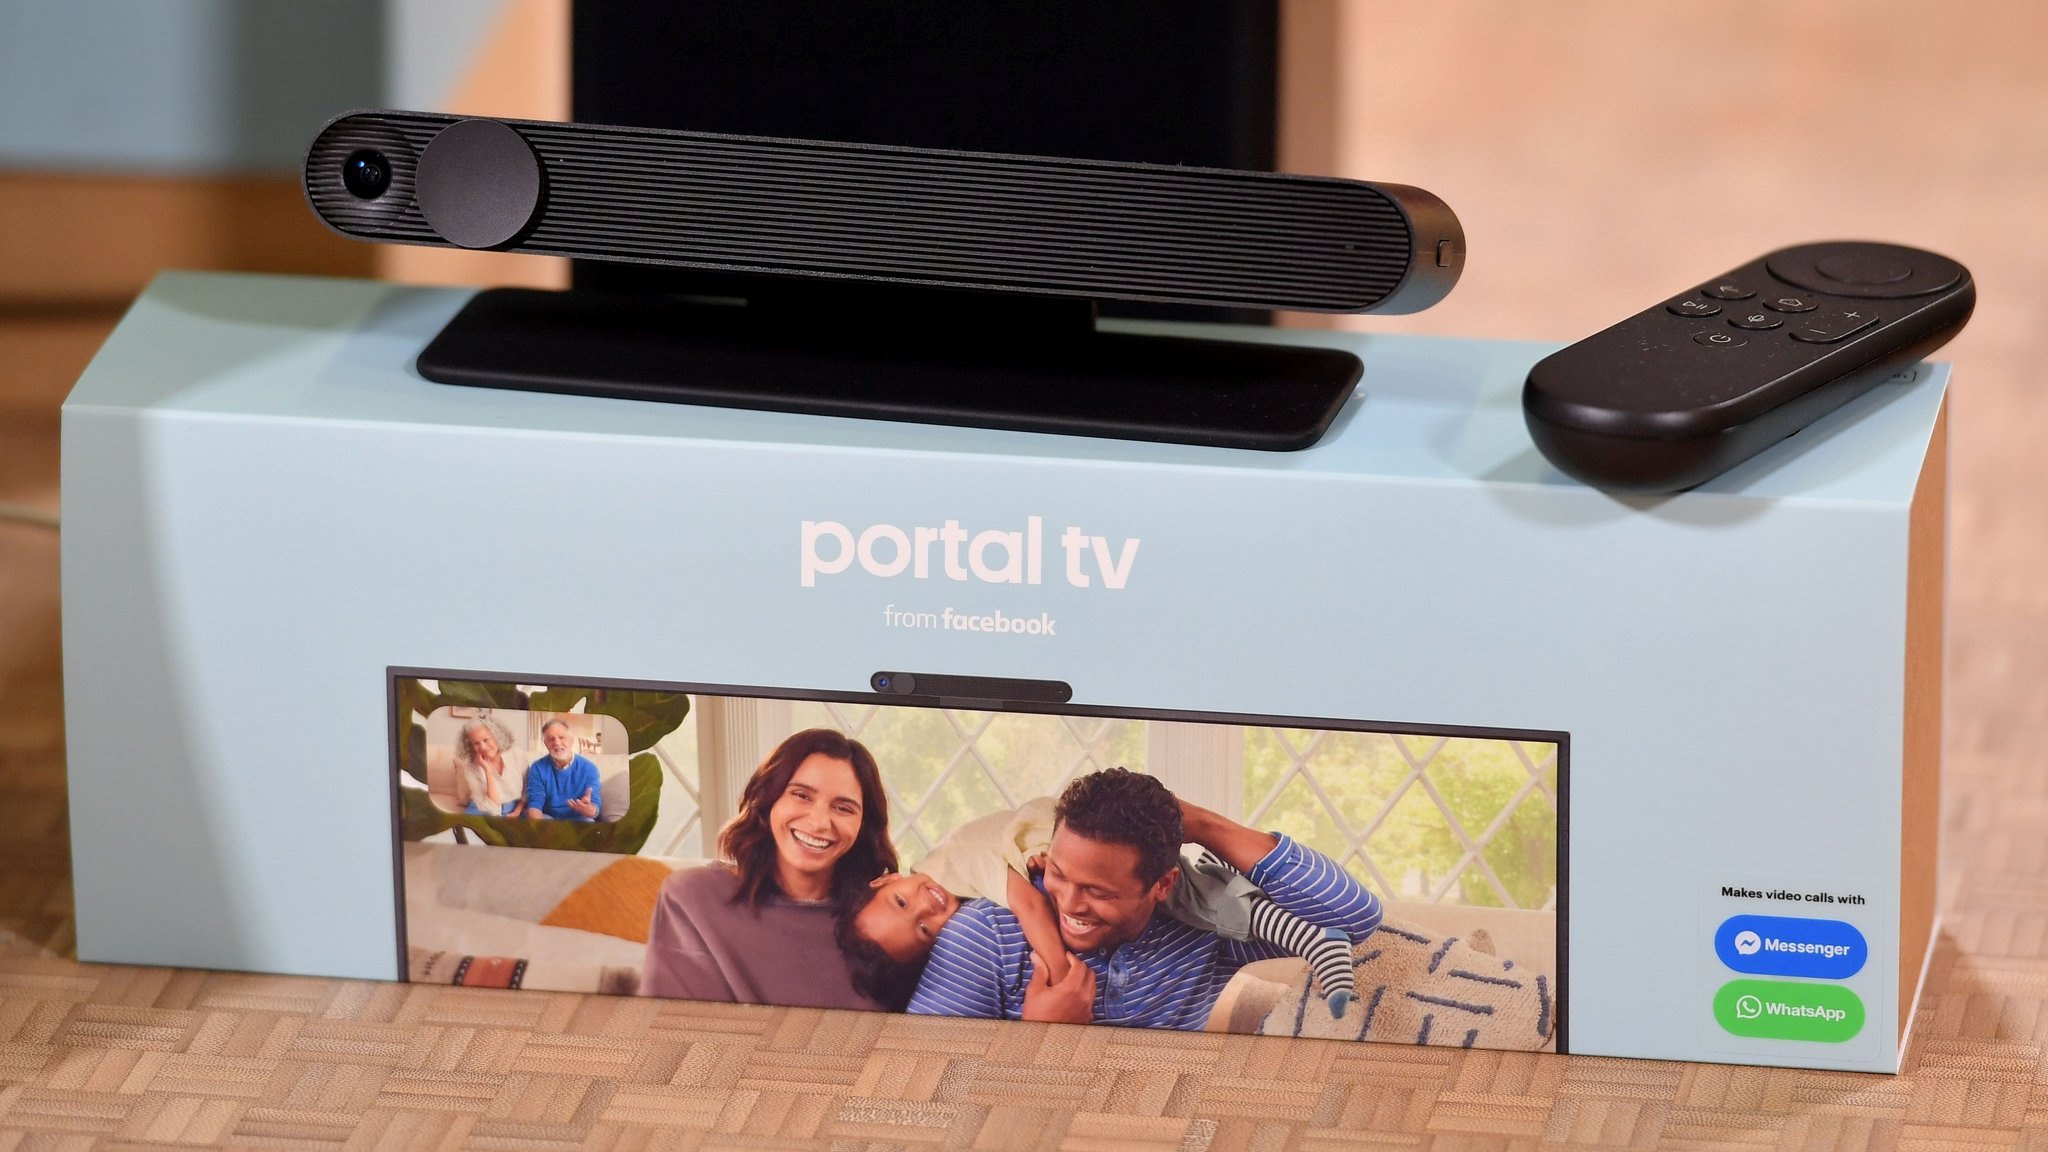 What Is Facebook Portal TV And How Does It Work?